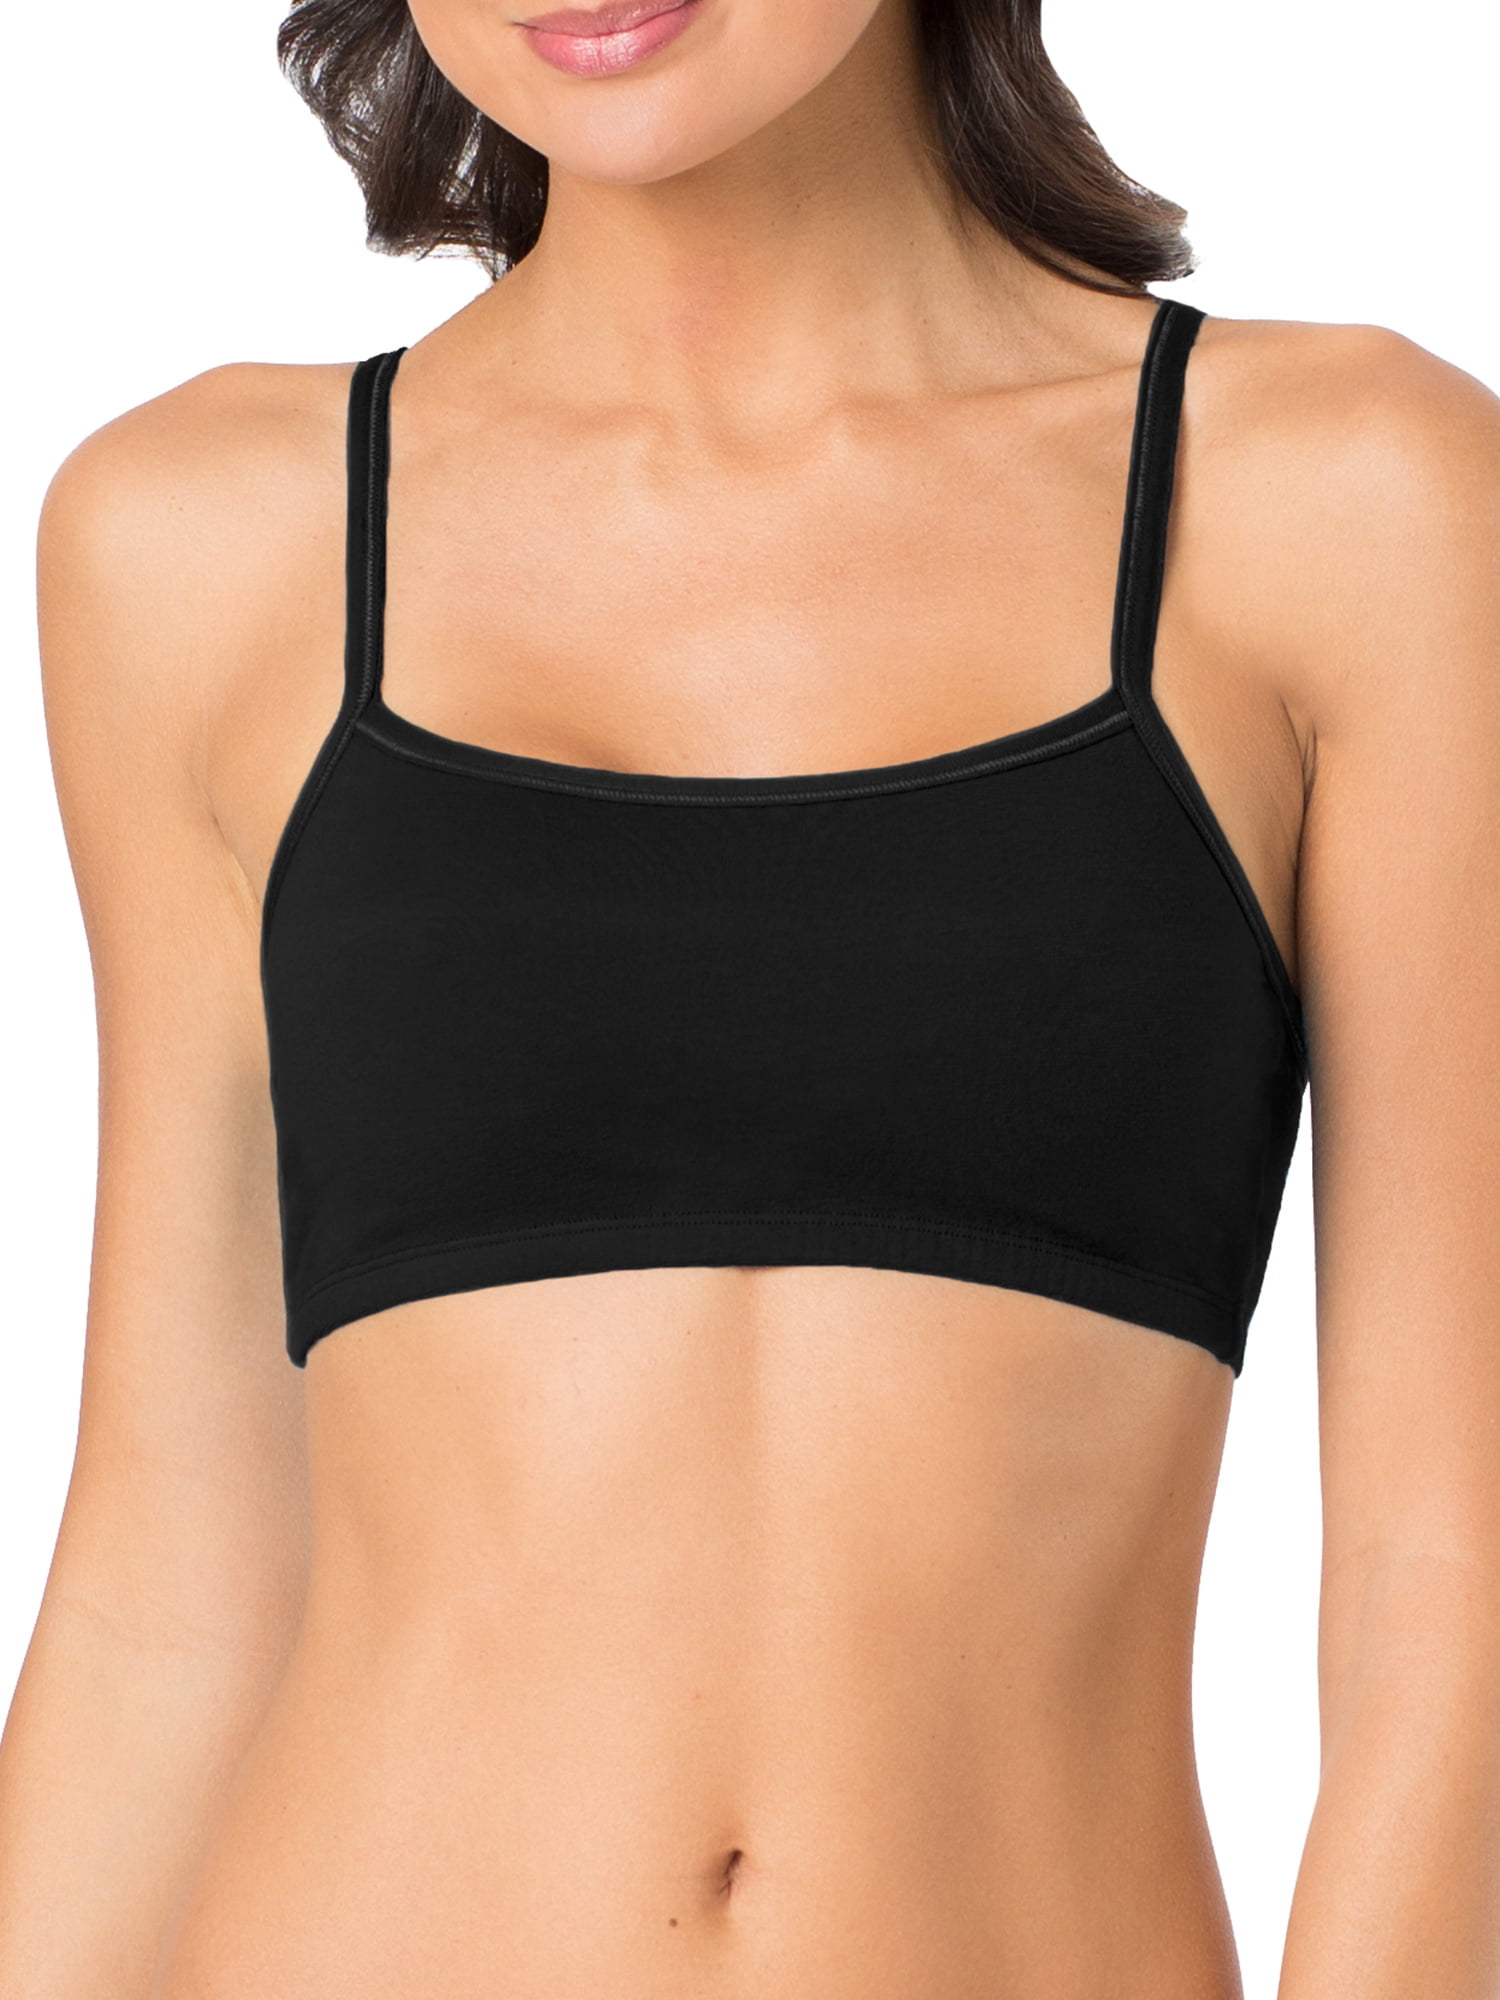 Fruit of the Loom Women's Spaghetti Strap Cotton Sports Bra, 3-Pack,  Style-9036 